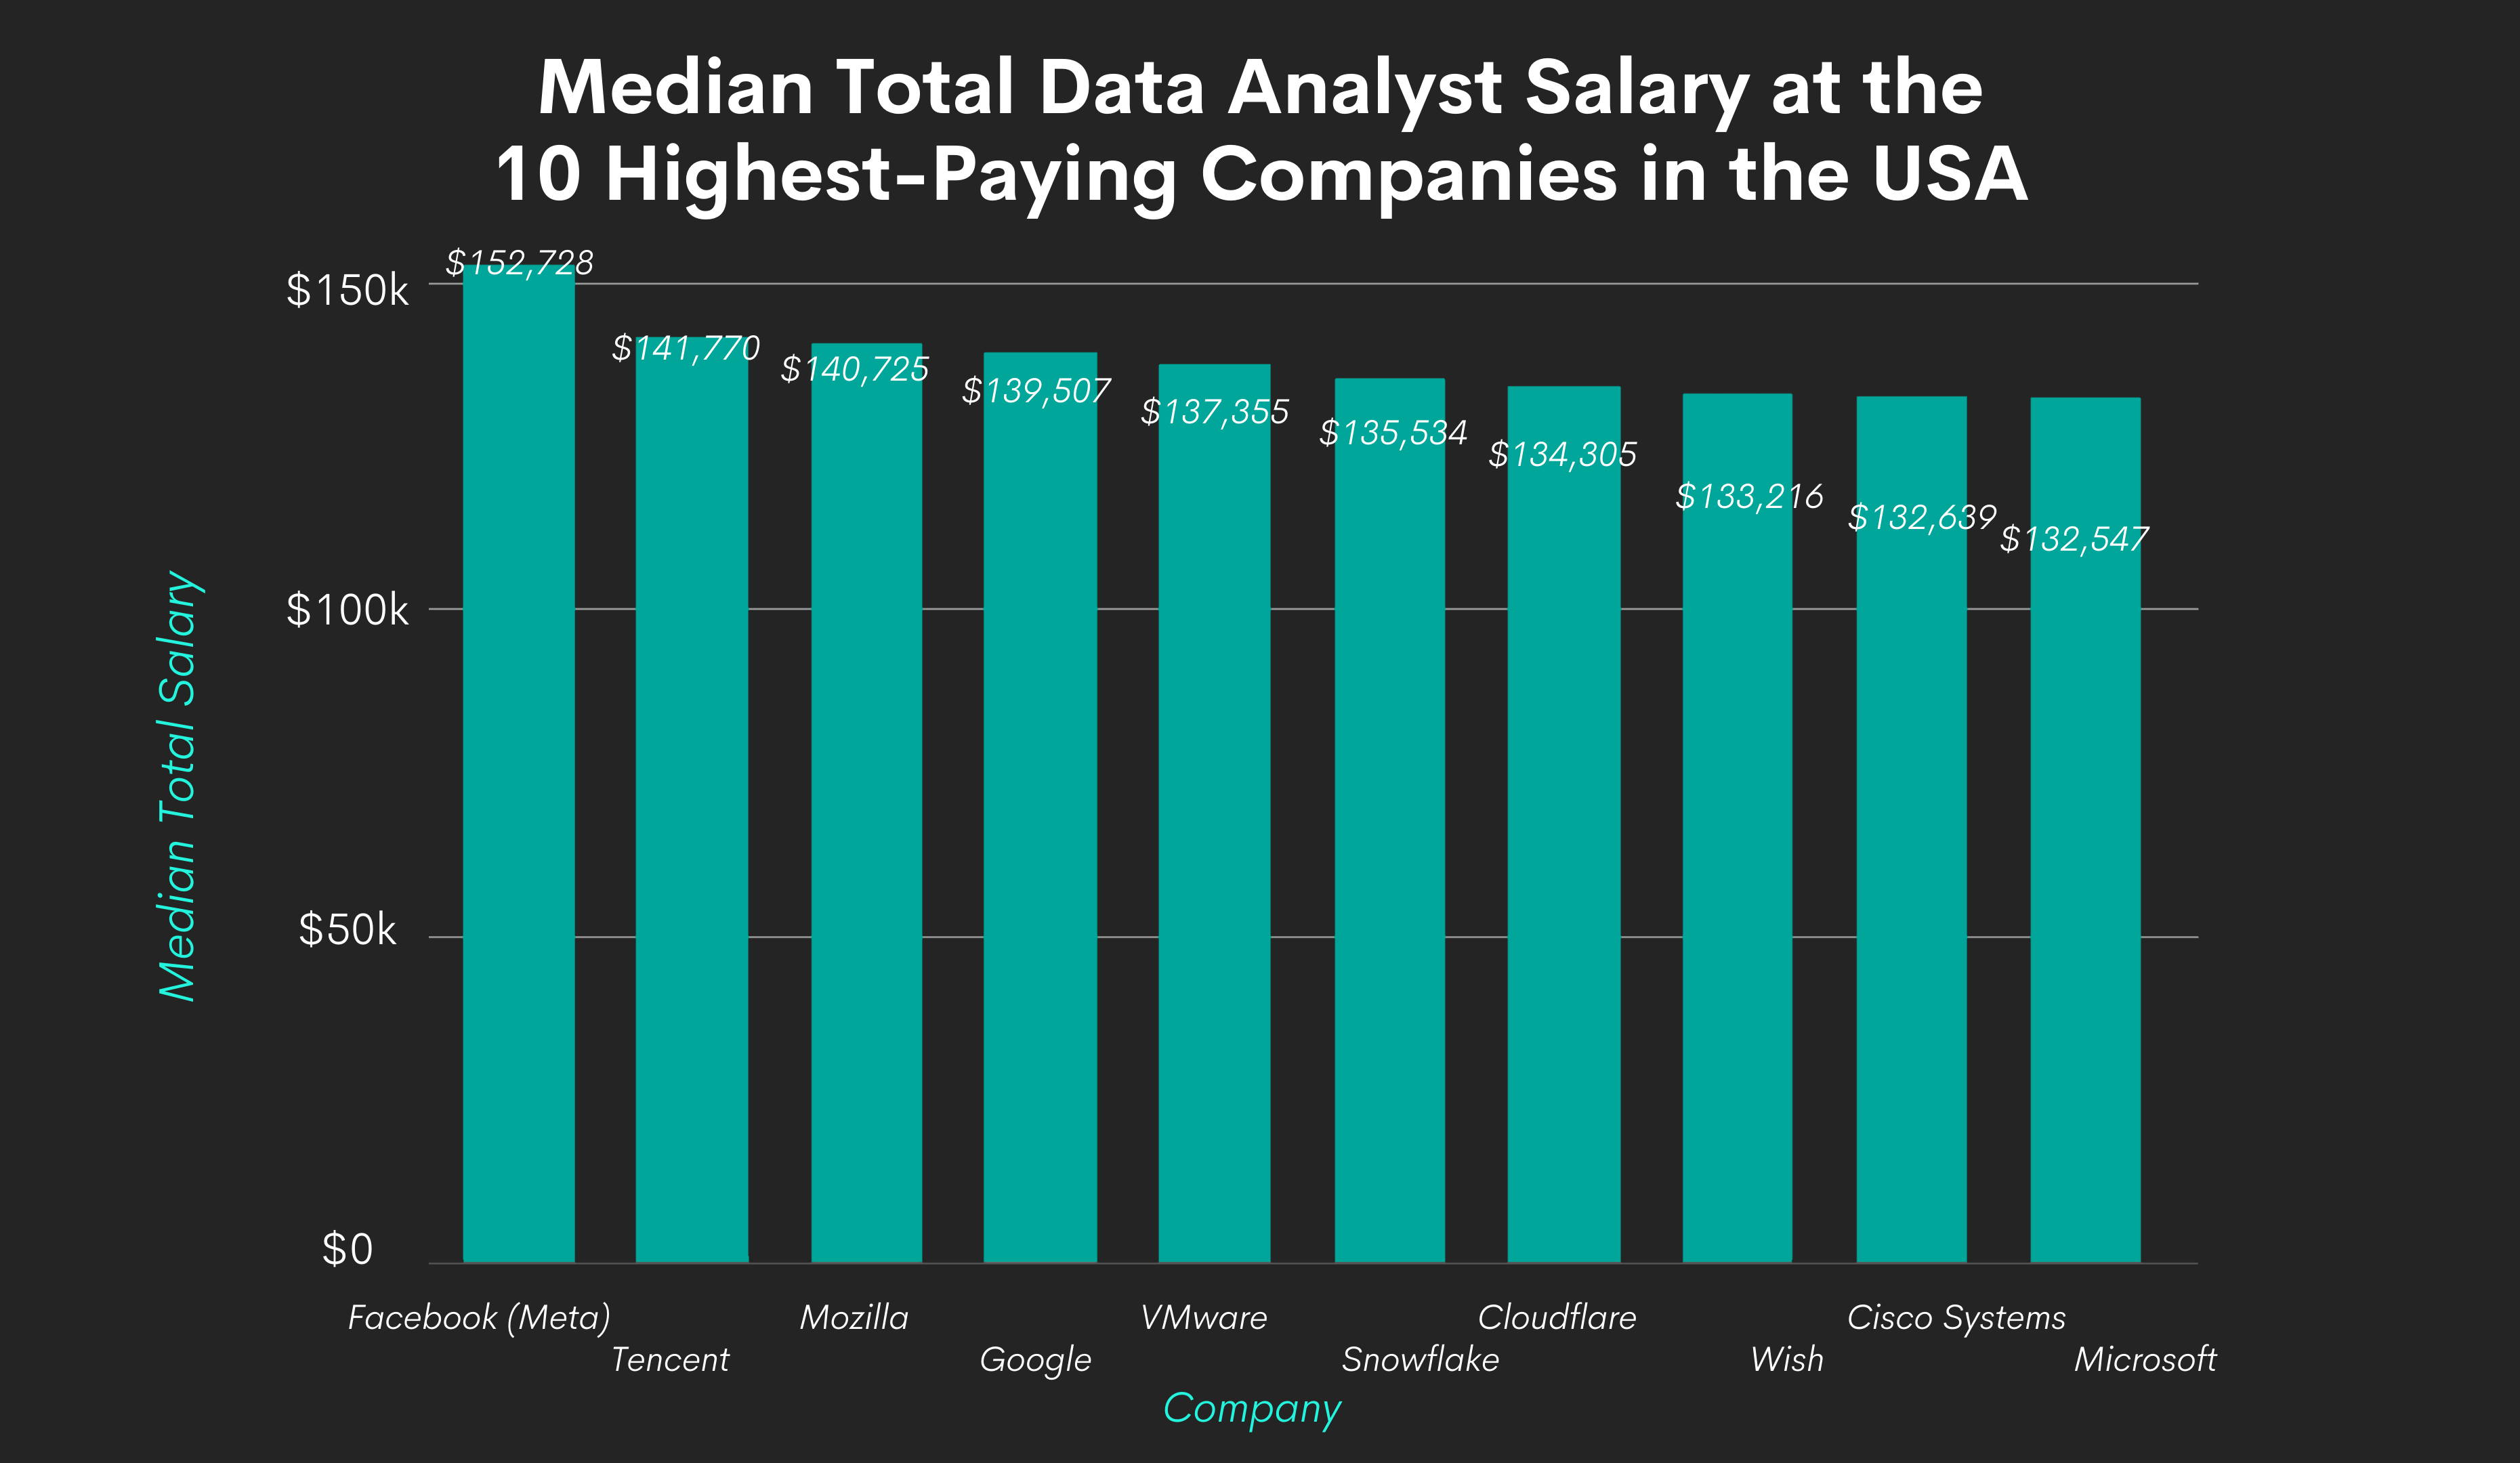 Data Analyst Salary at Top 10 Paying Companies in the USA